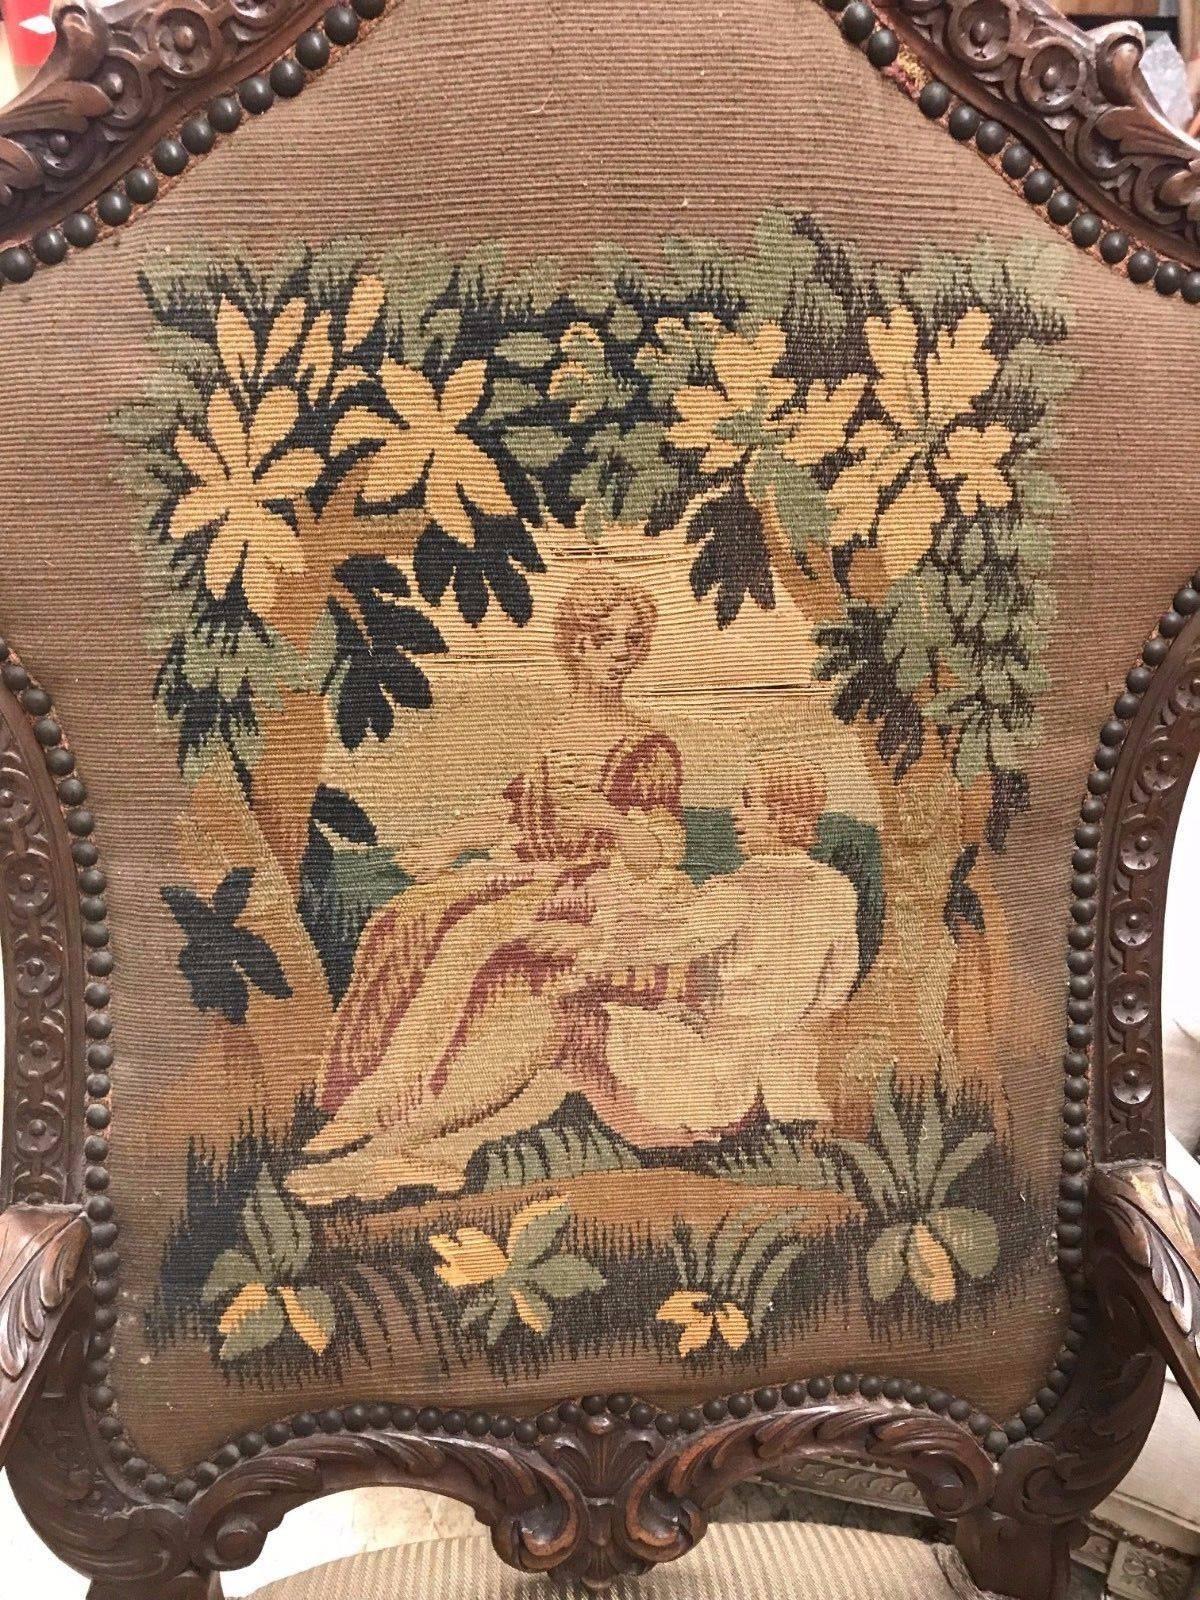 Finely carved antique French Renaissance walnut open armchair with a shaped crest rail draped with acanthus leaves. The back with needlepoint tapestry fabric depicting a garden scene with paramours.

The beautifully contoured arms with scrolled